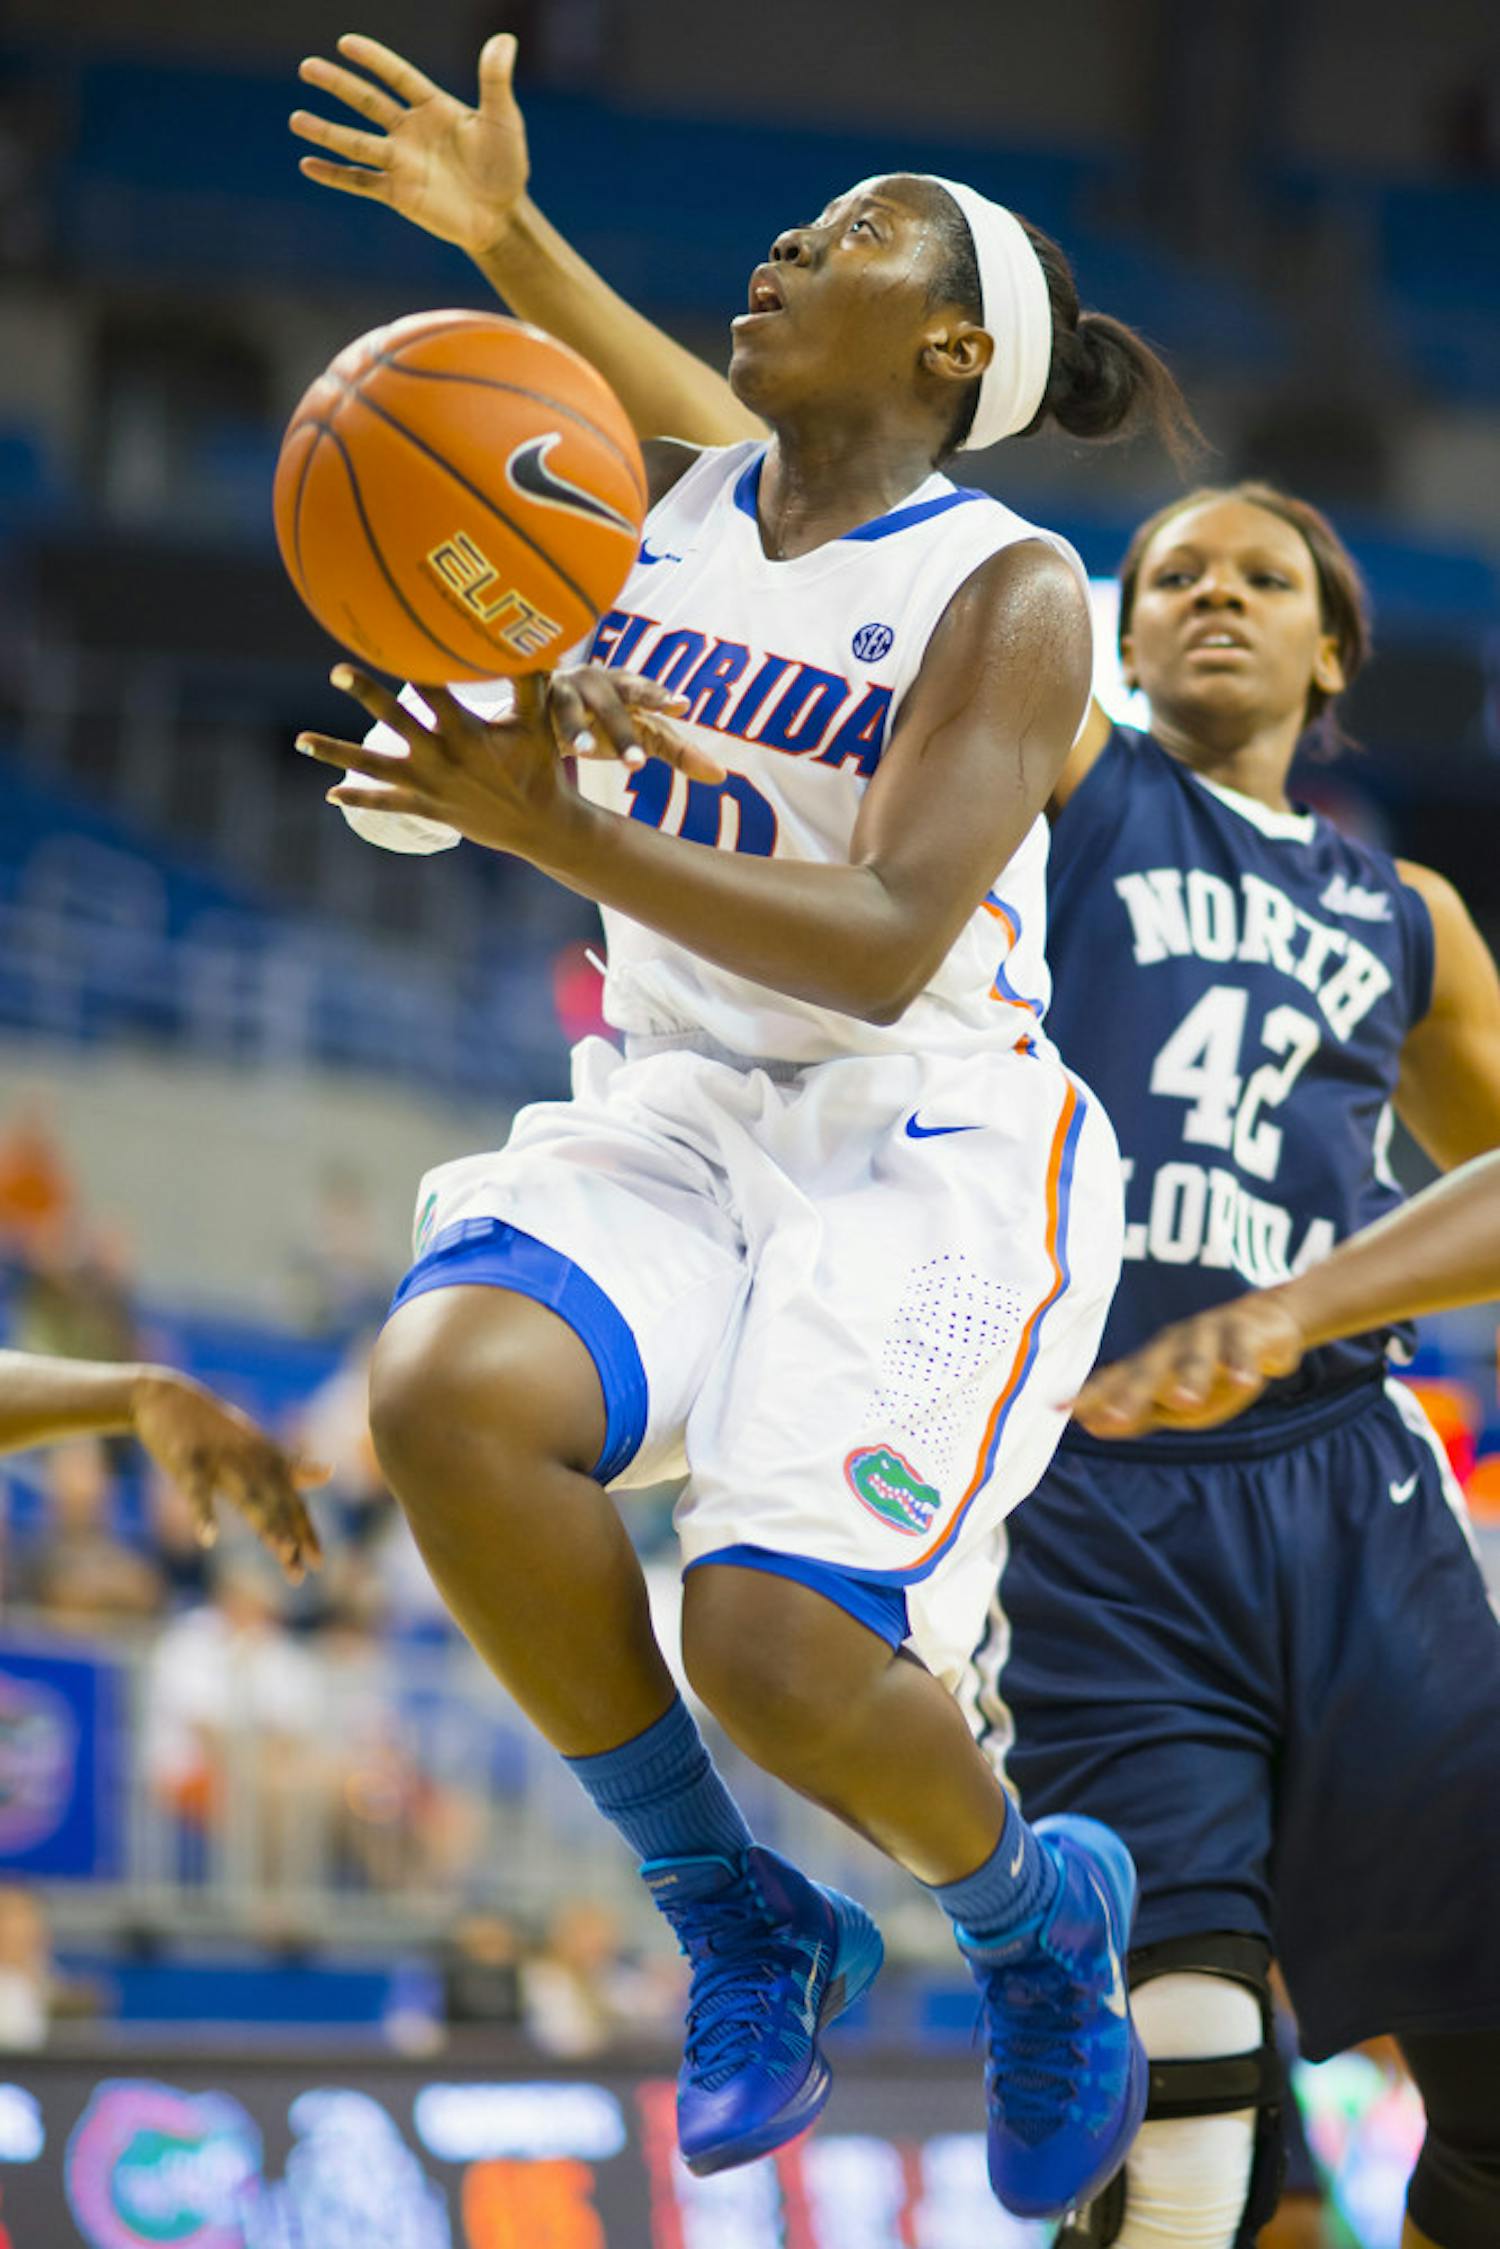 Jaterra Bonds attempts a shot during Florida's 88-77 victory against North Florida on Nov. 10 in the O'Connell Center. 